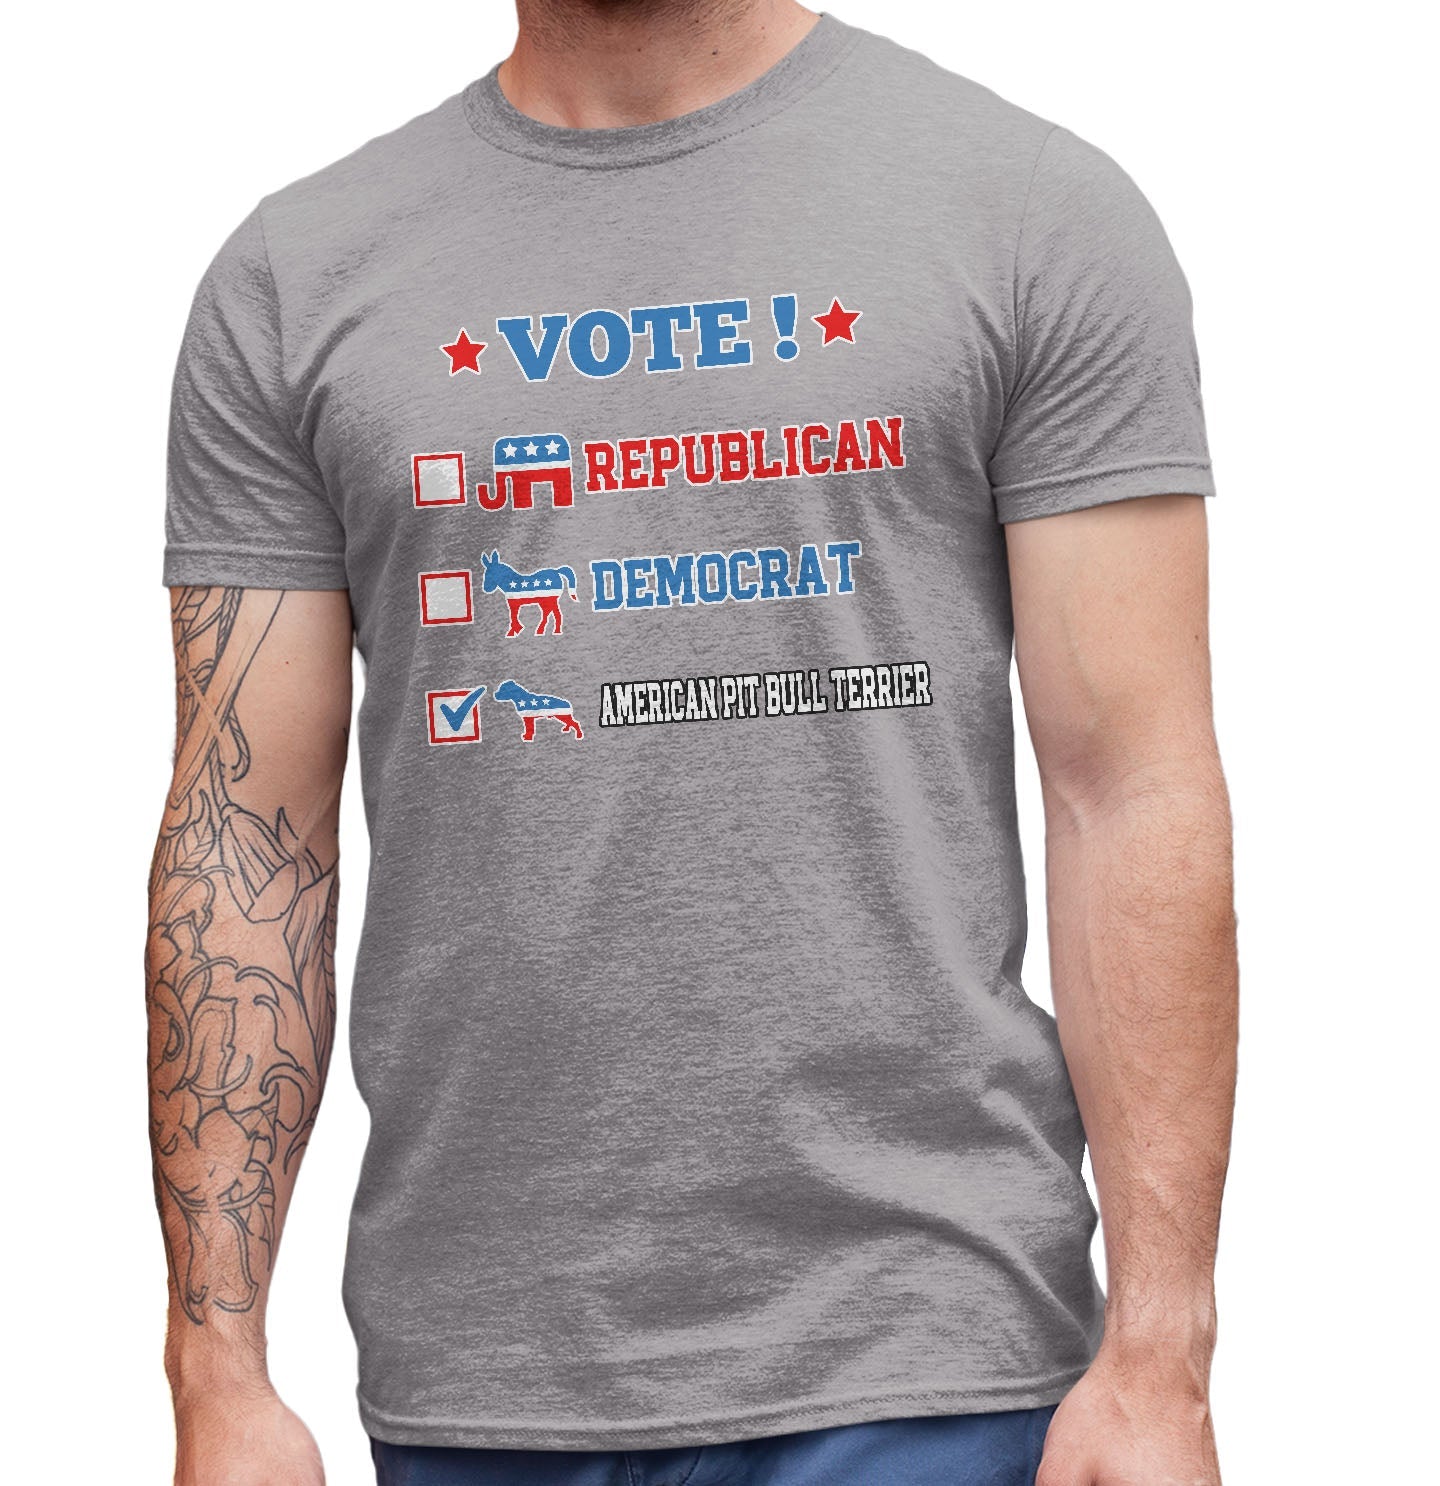 Vote for the American Pit Bull Terrier - Adult Unisex T-Shirt